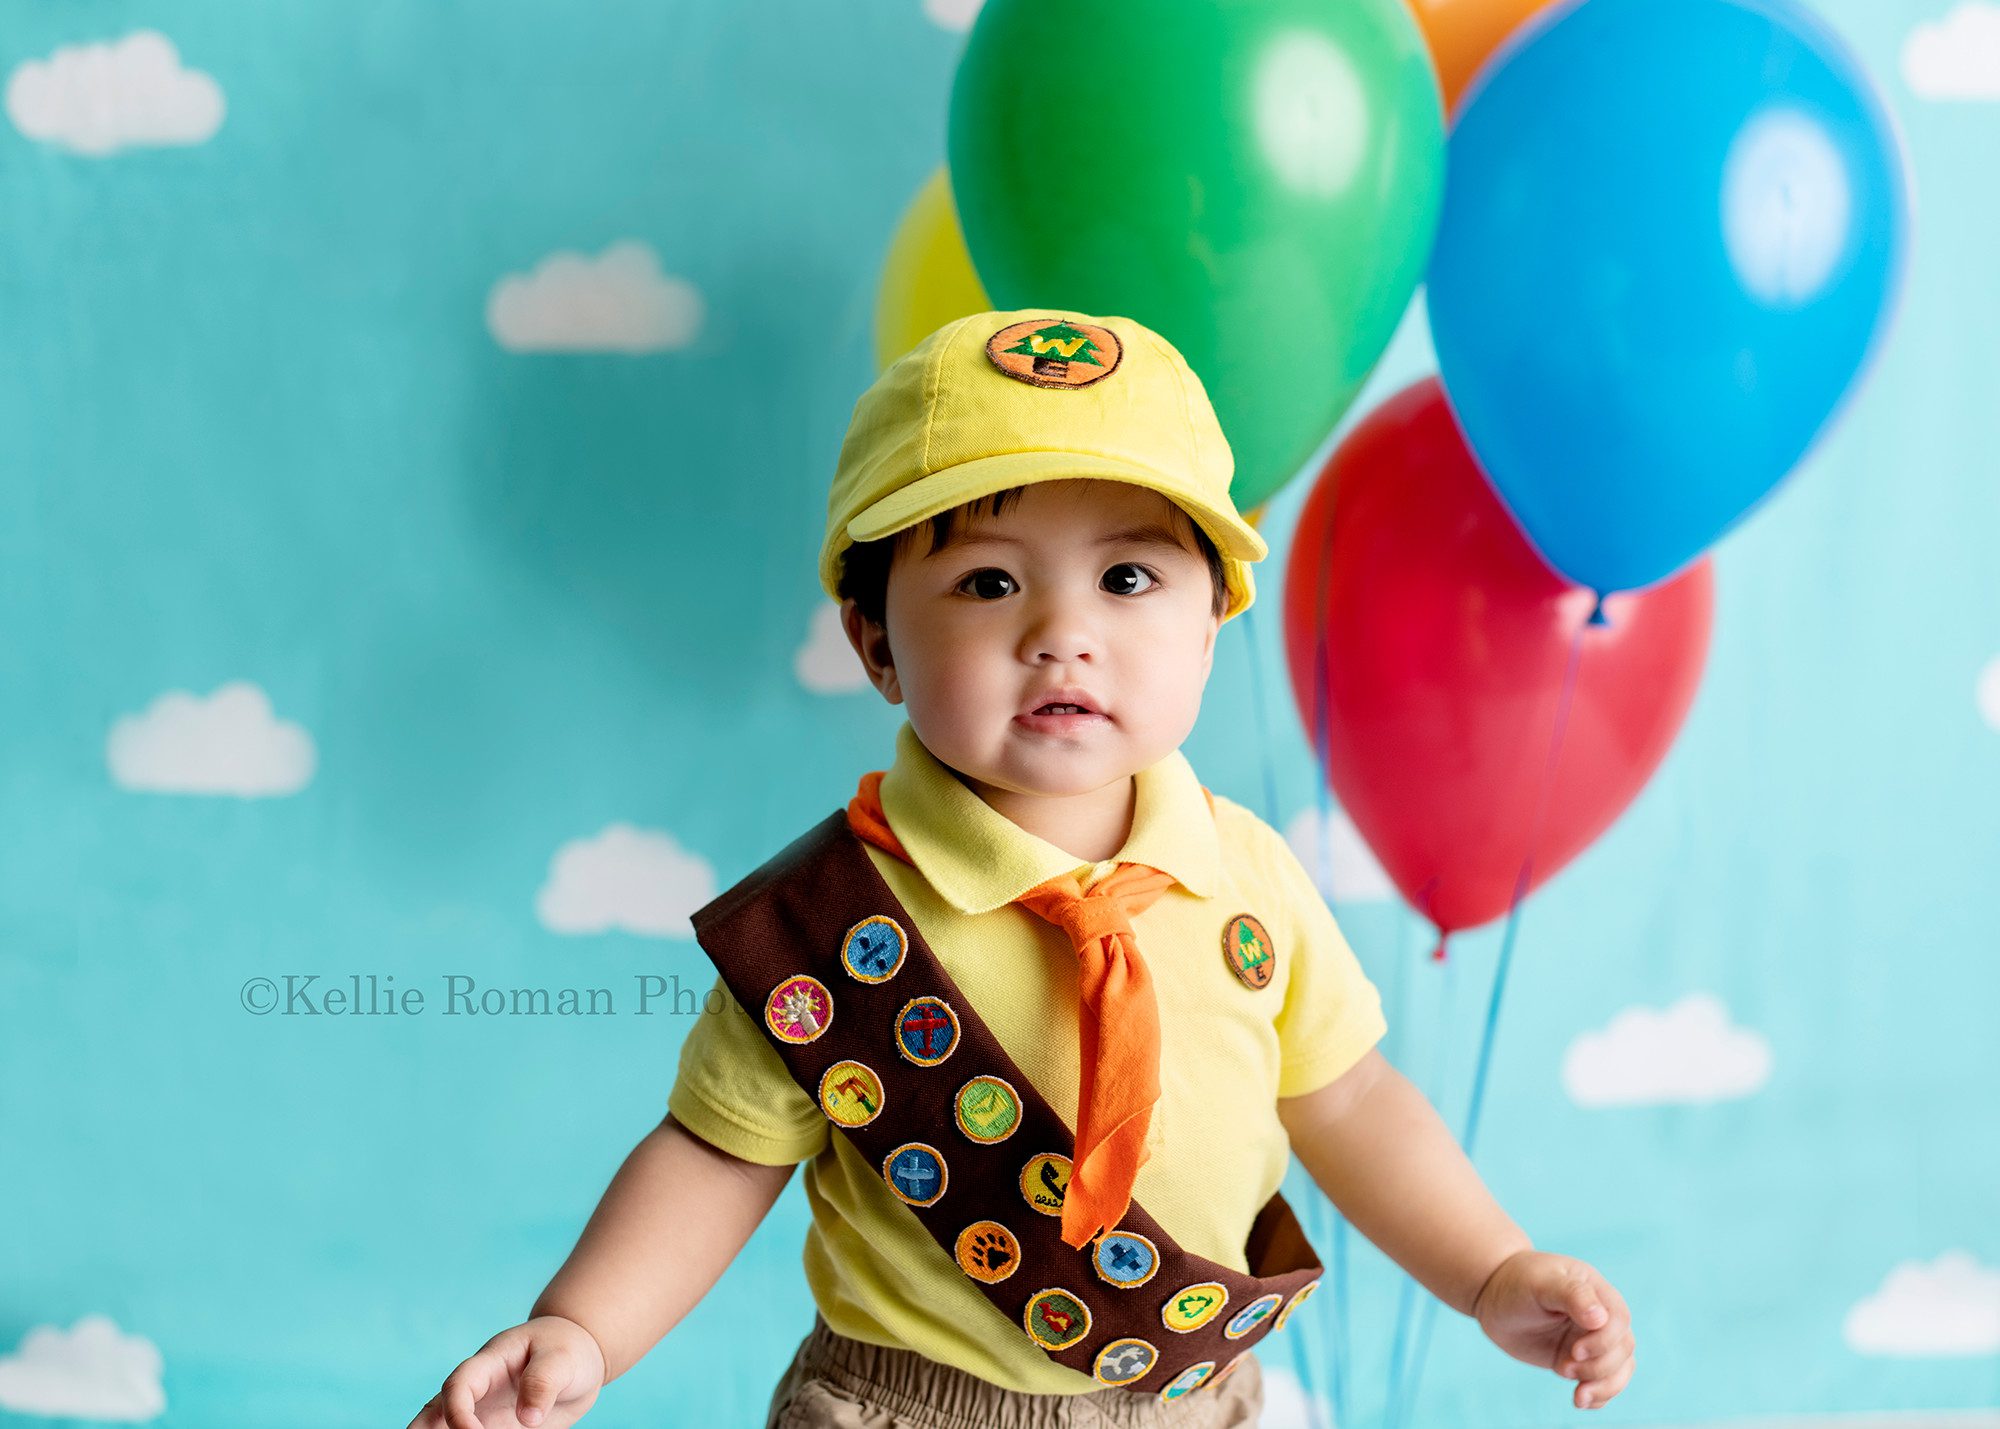 up up and away a kenosha boy in Milwaukee photographer studio wearing a costume that looks like the character in the movie UP. He has a scout uniform one with brown sash and orange scarf. He's infant of a blue cloud backdrop with colored balloons